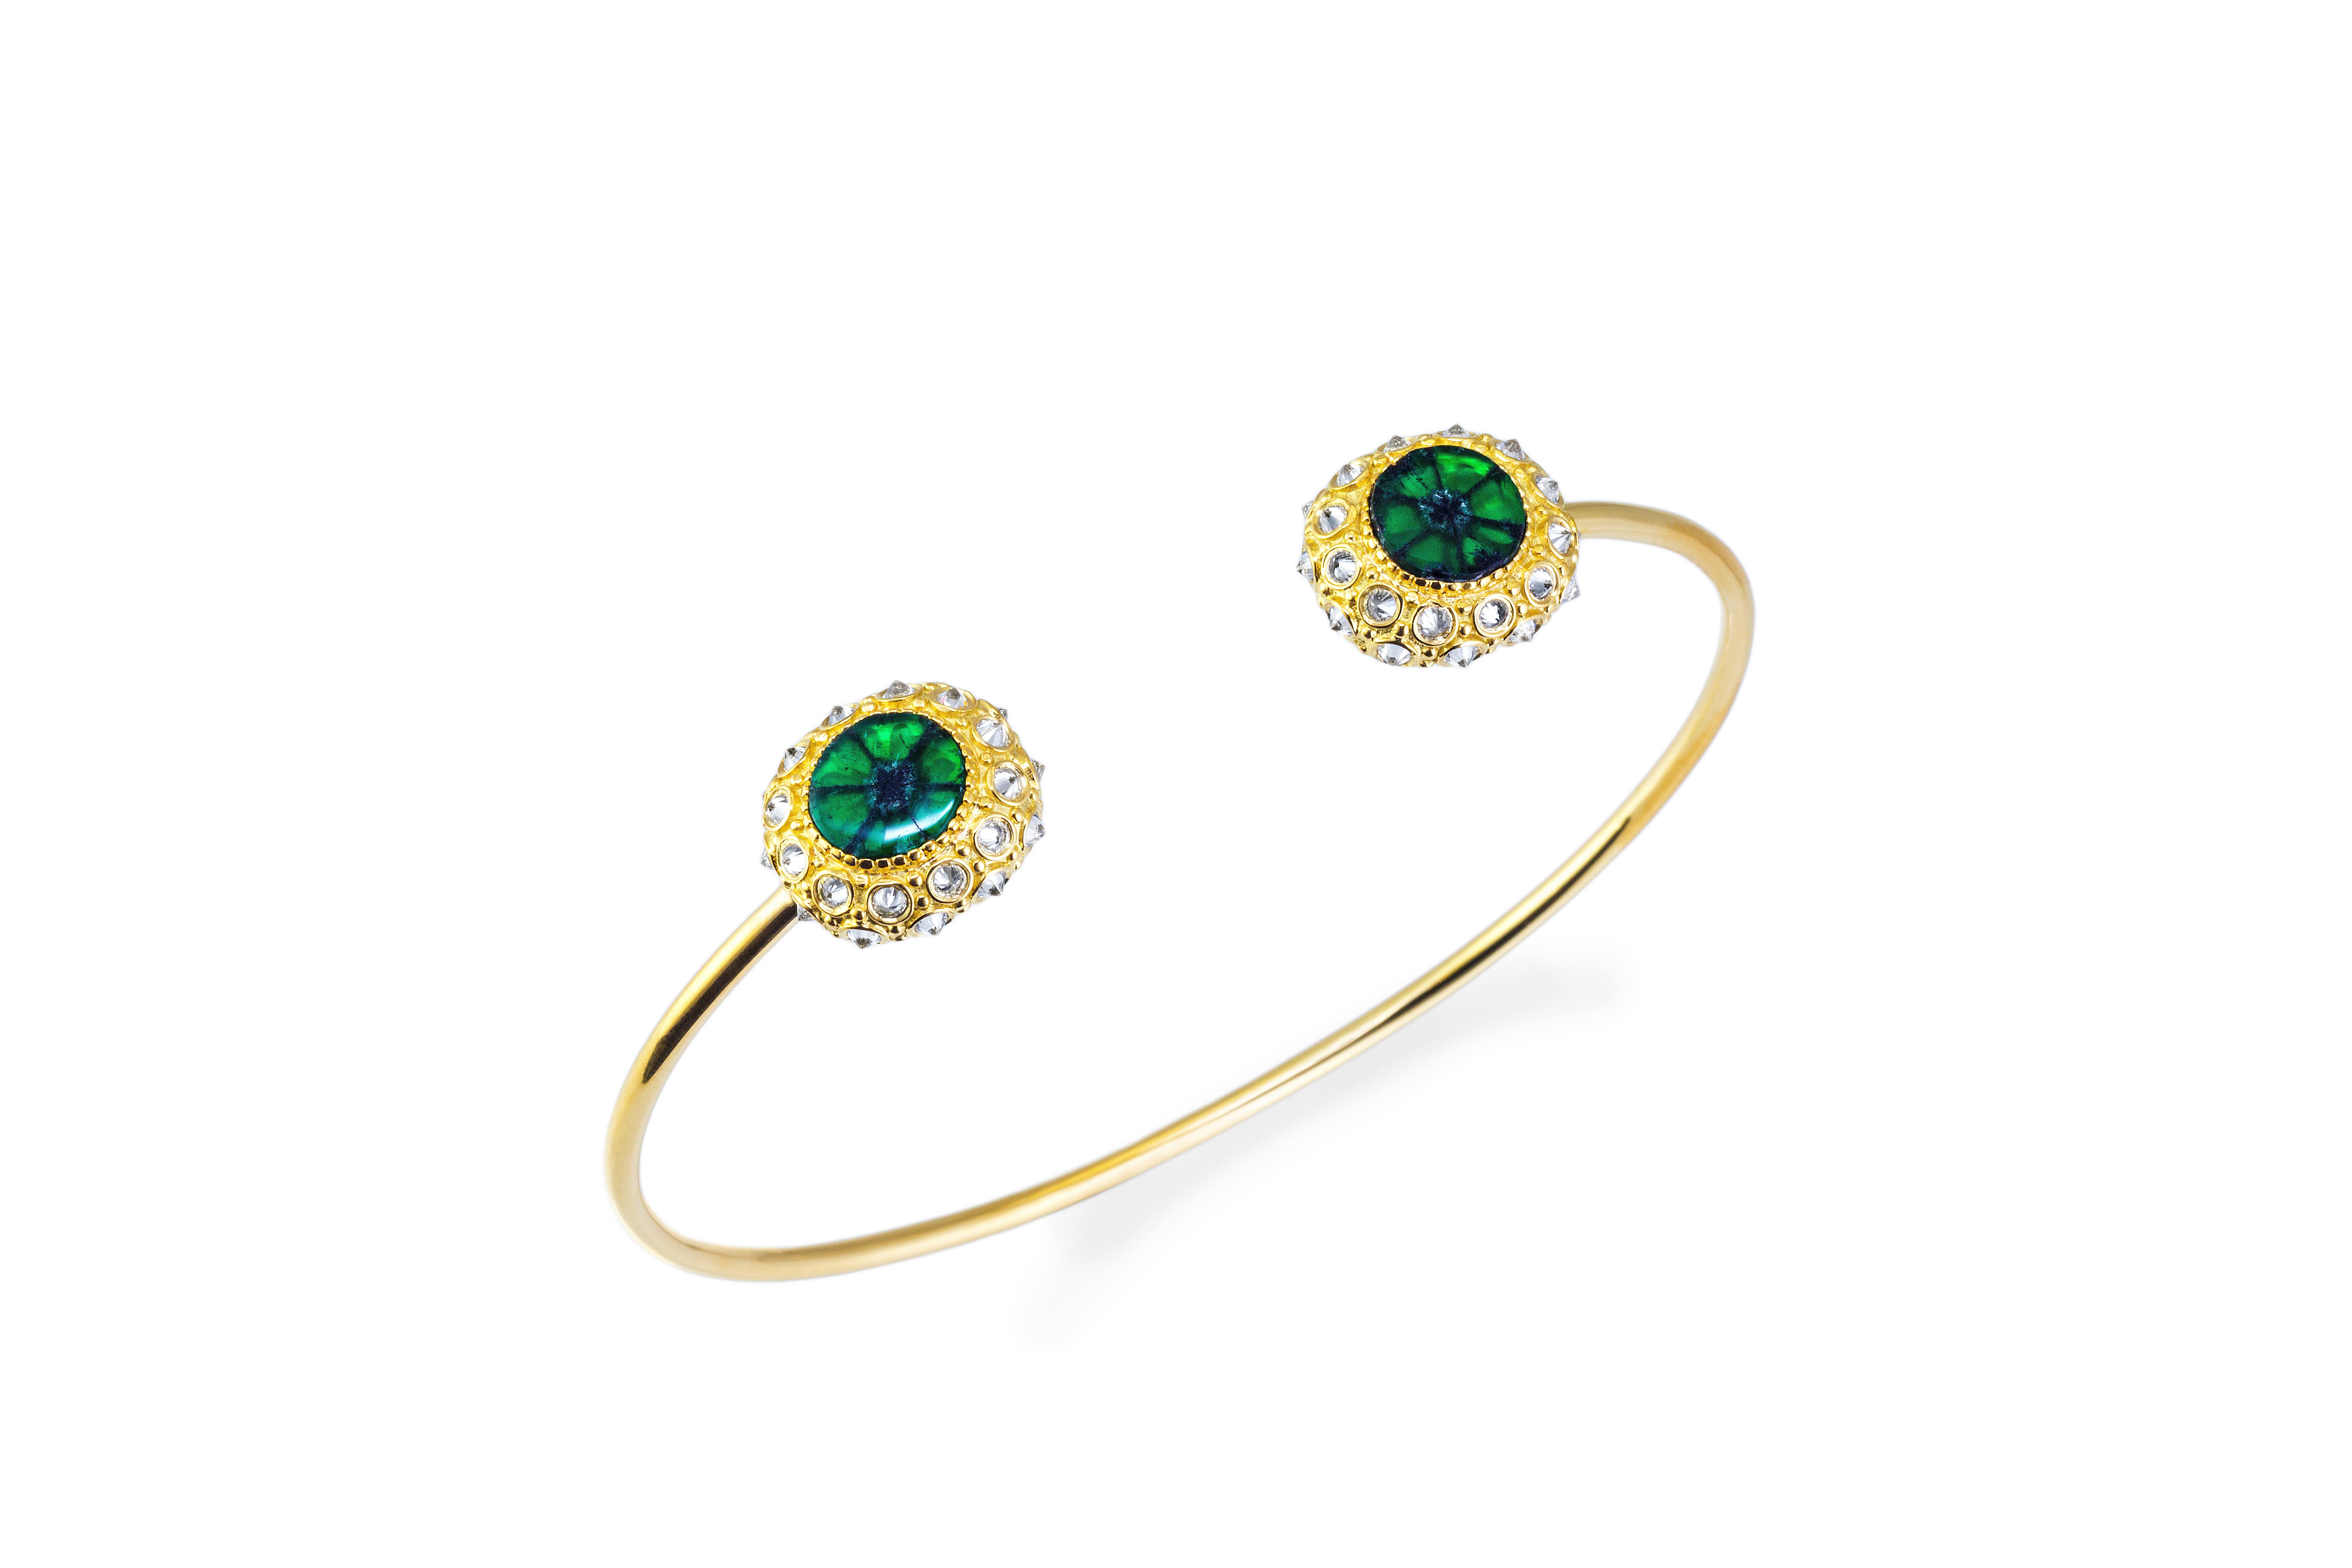 ONE-OF-A-KIND

AnaKatarina’s ‘Stompin’ at the Savoy’ ‘Cuff is an homage to the beautiful sea urchin and its totem of intuition and evolution. This beautiful work of art is one-of-a-kind. A rare Trapiche emeralds adorn the center of the two sea